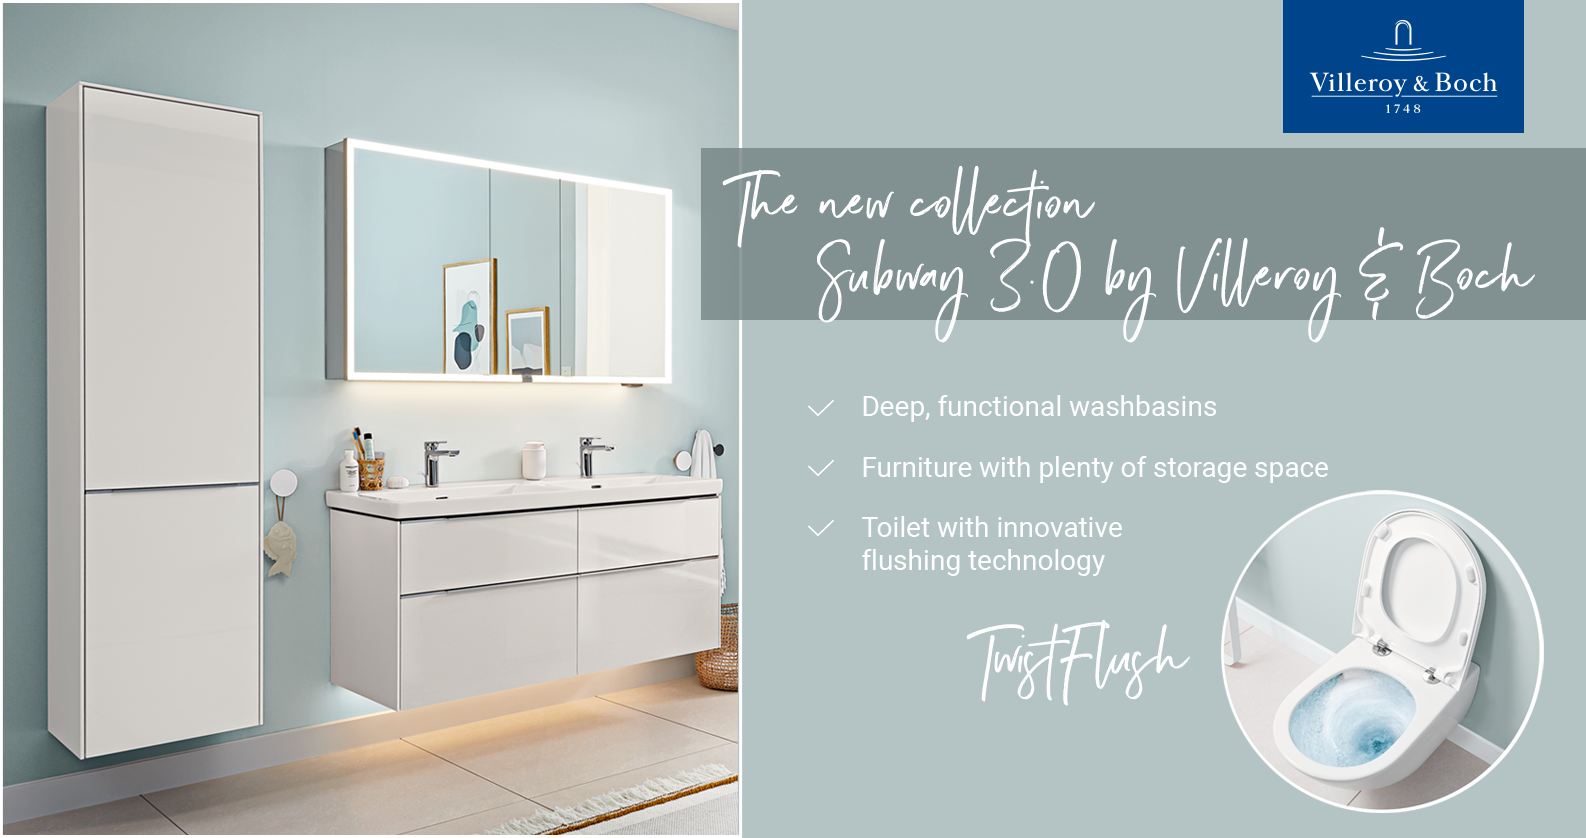 Villeroy & Boch - Subway 3.0 designed for life at xTWOstore